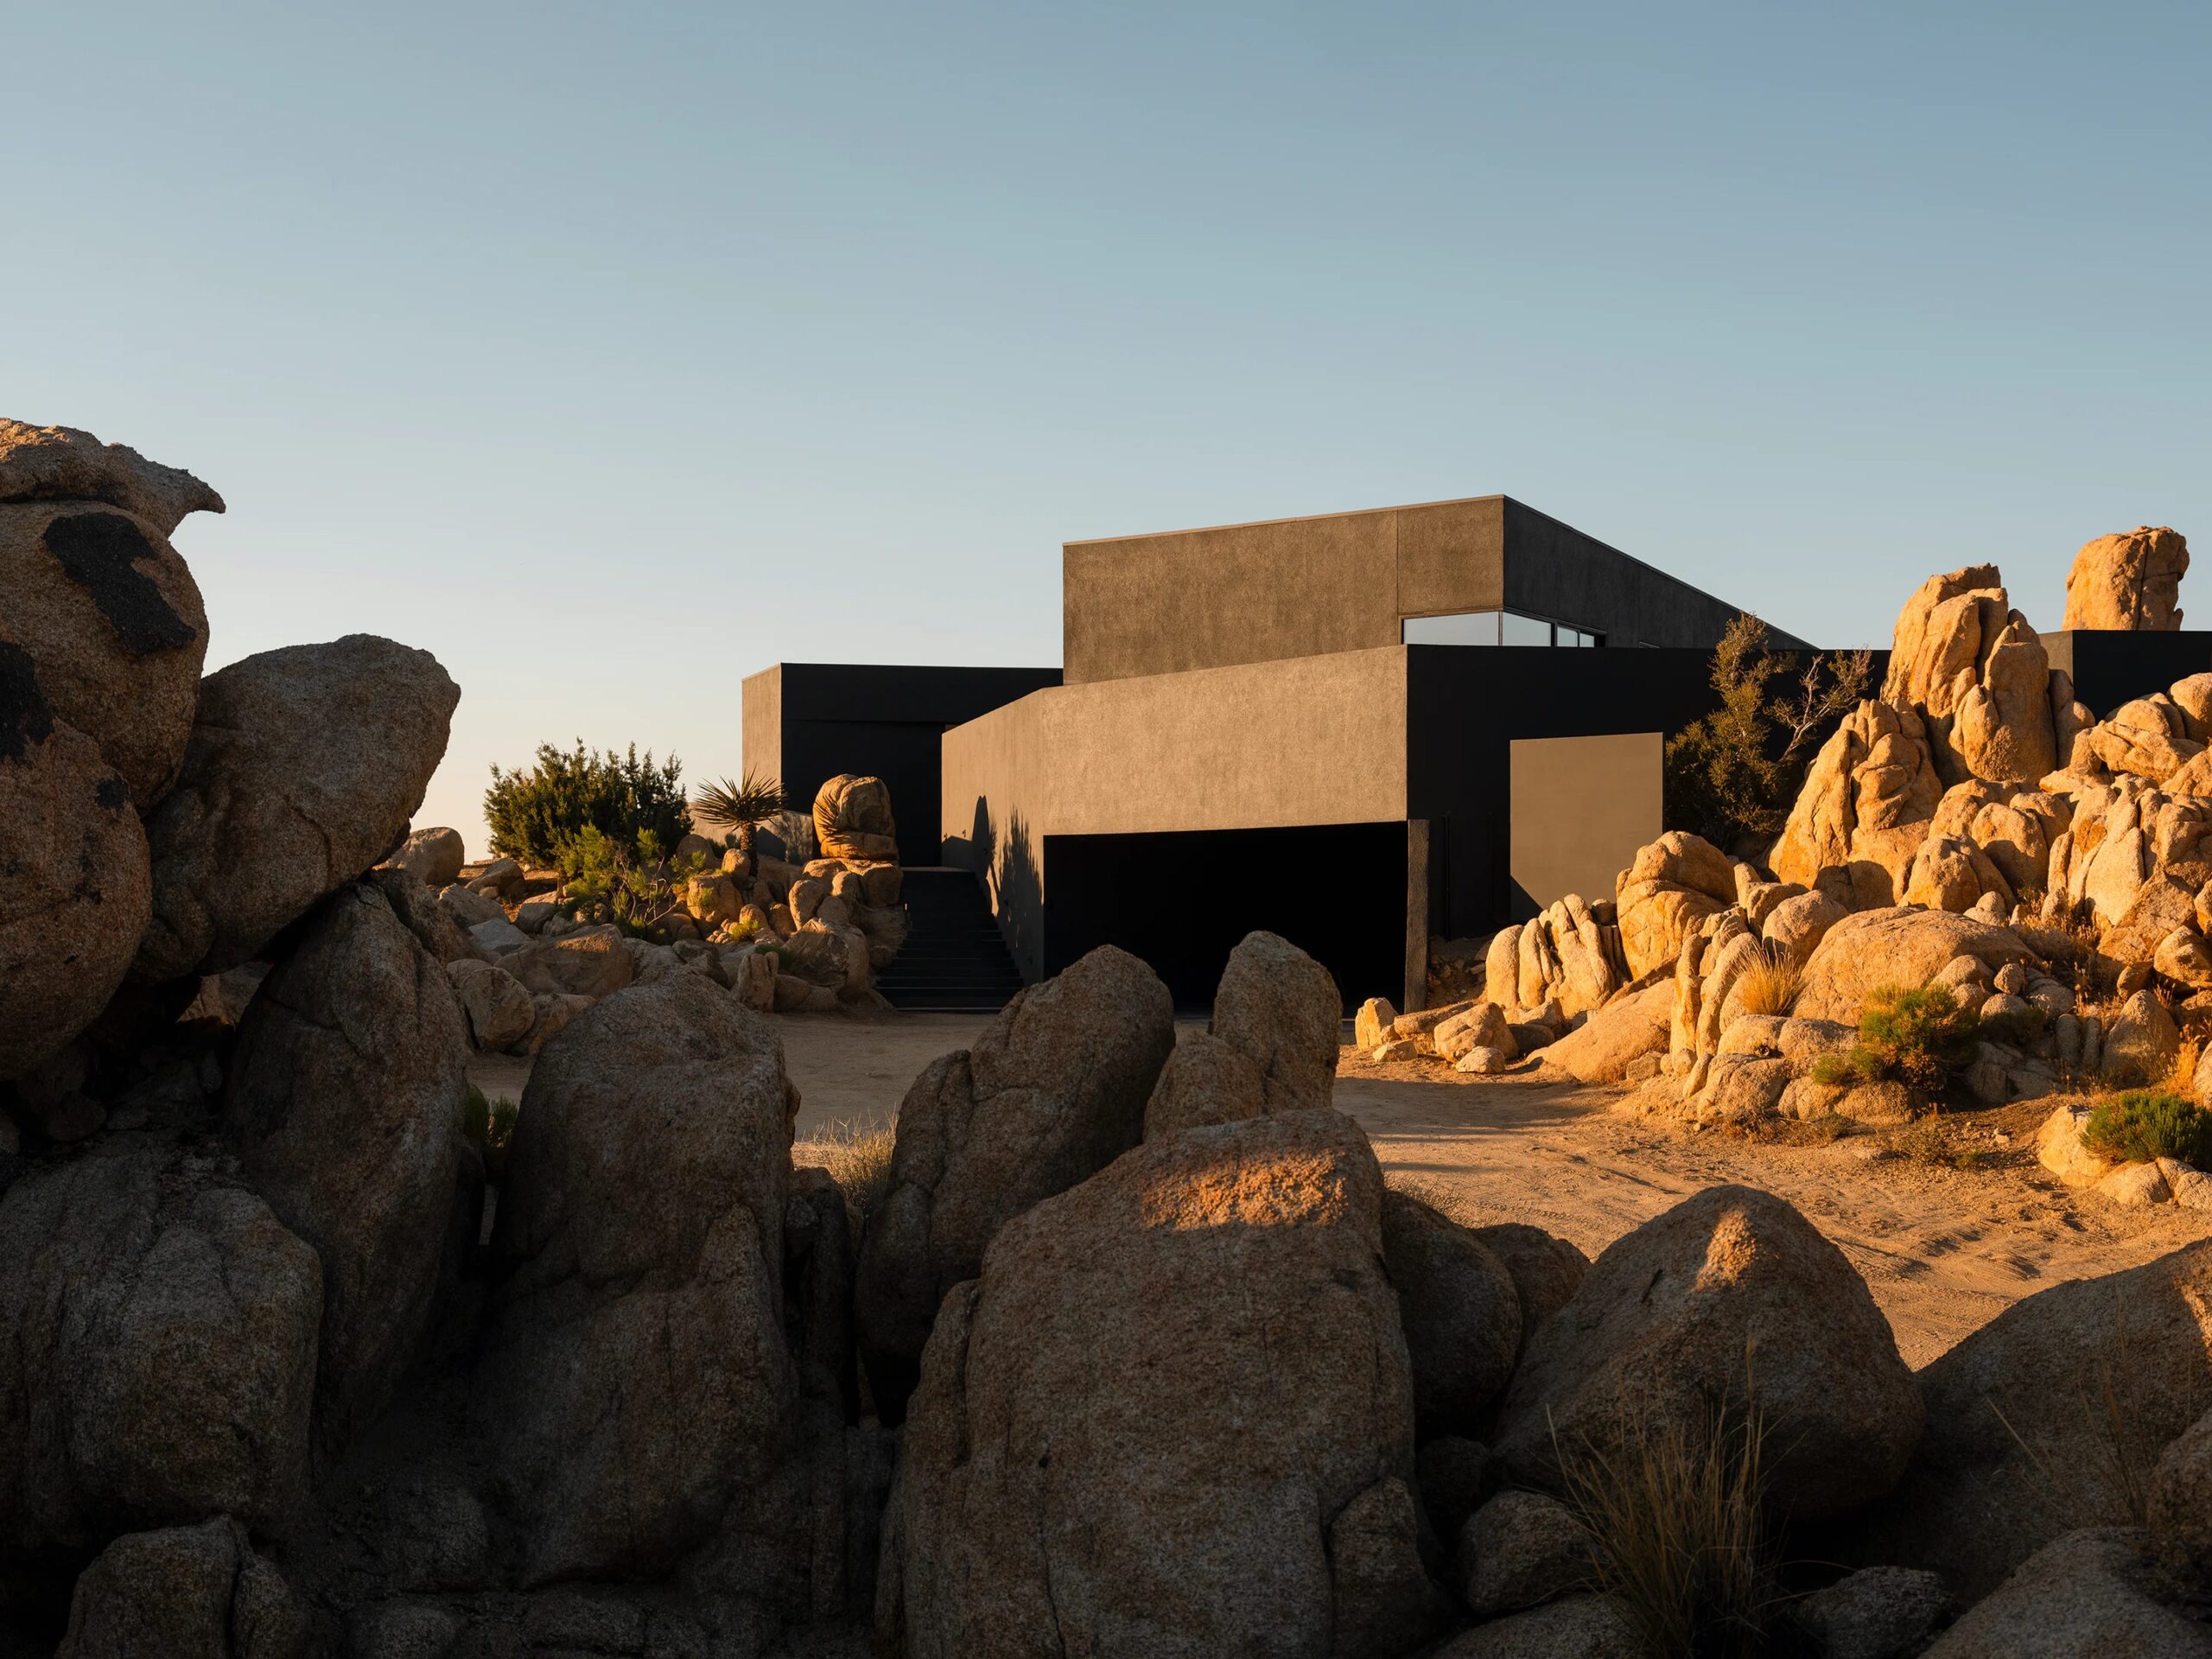 Exterior view of a modern home surrounded by desert landscape and boulders called Black Desert House near Joshua Tree National Park, California.